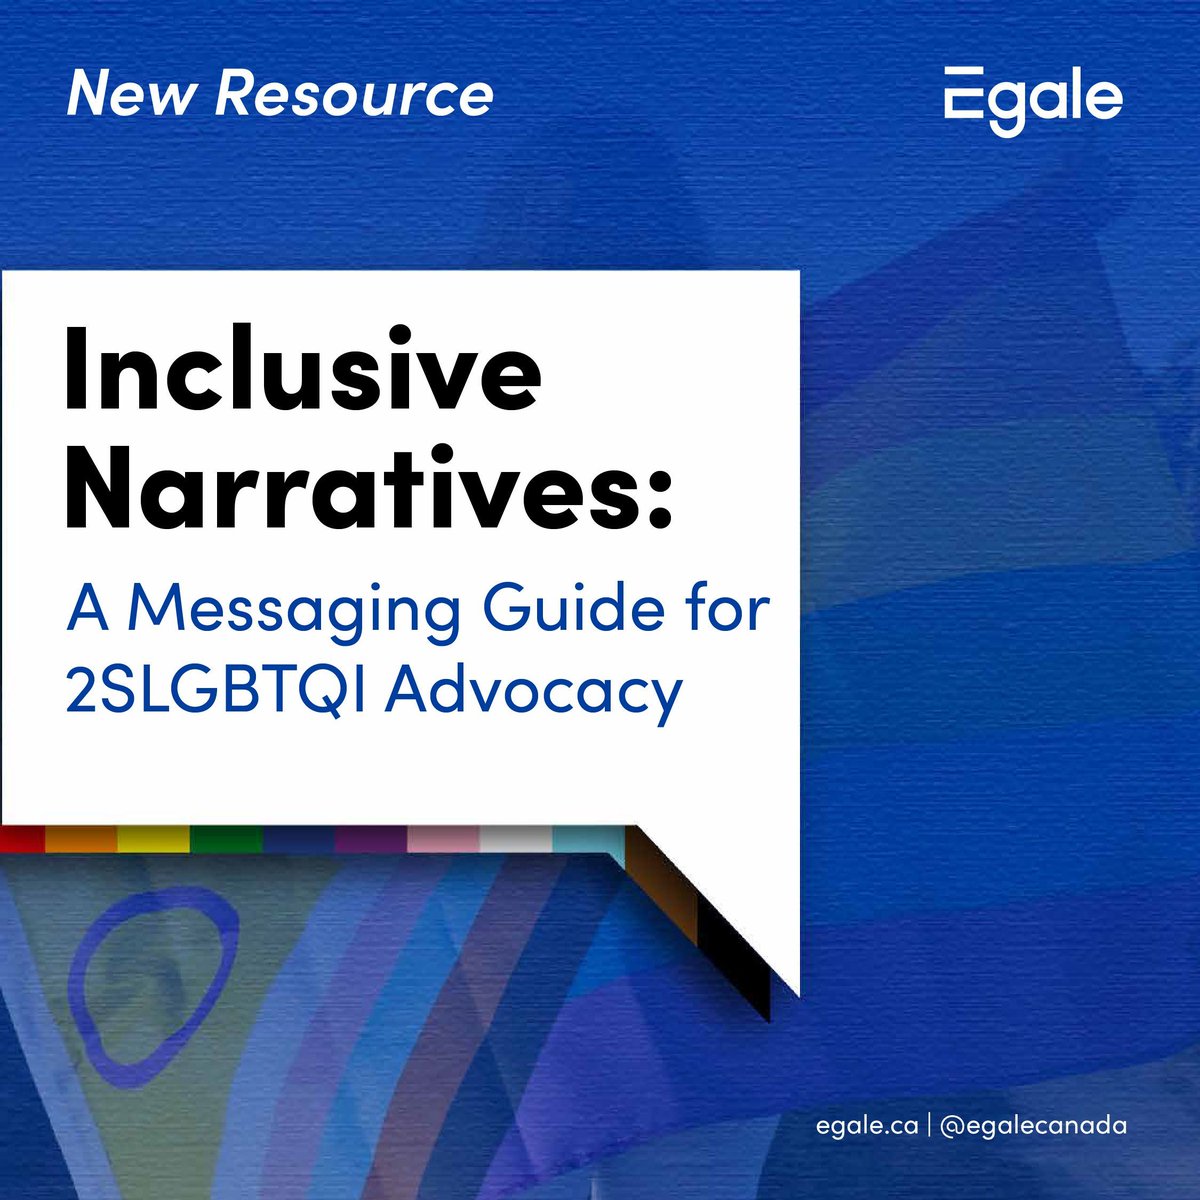 We have created this guide to provide the tools needed by 2SLGBTQI advocates, organizations, activists and allies to develop effective messaging to combat the ongoing rise in anti-2SLGBTQI hate. Use this free resource today at egale.ca/inclusive-narr…